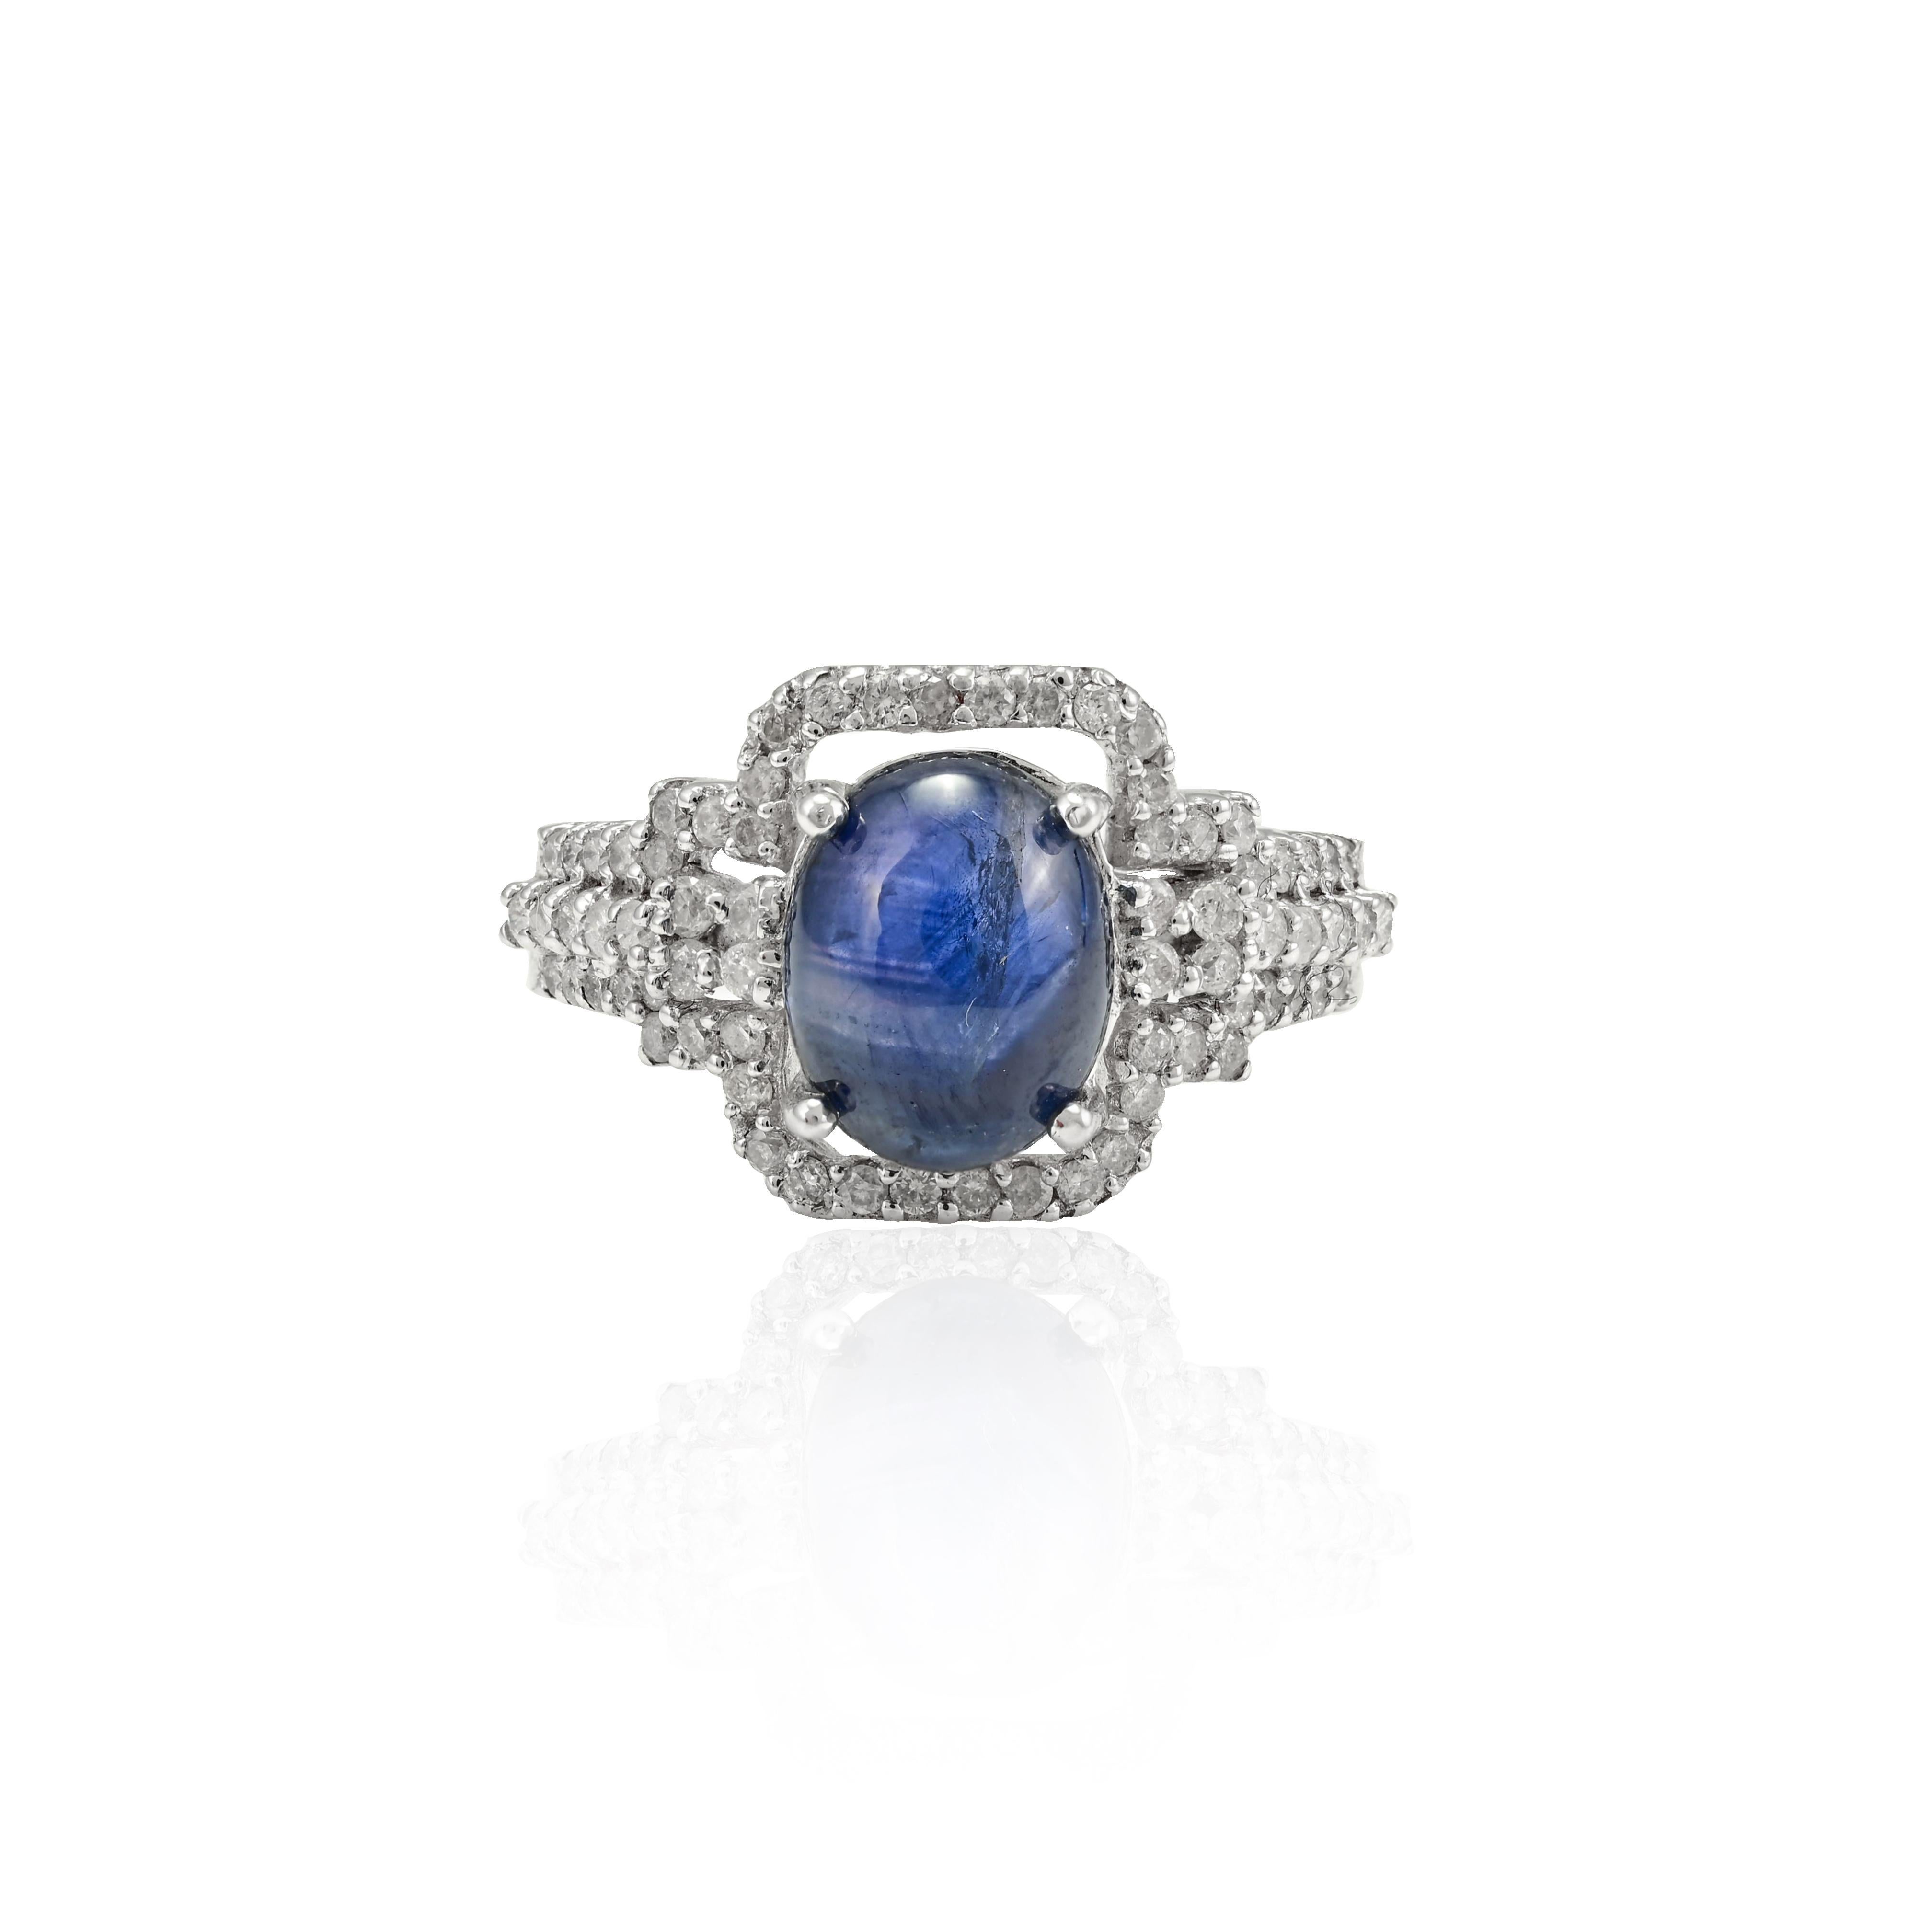 For Sale:  3.01 Ct Blue Sapphire and Diamond Engagement Ring Made 18k Solid White Gold 7